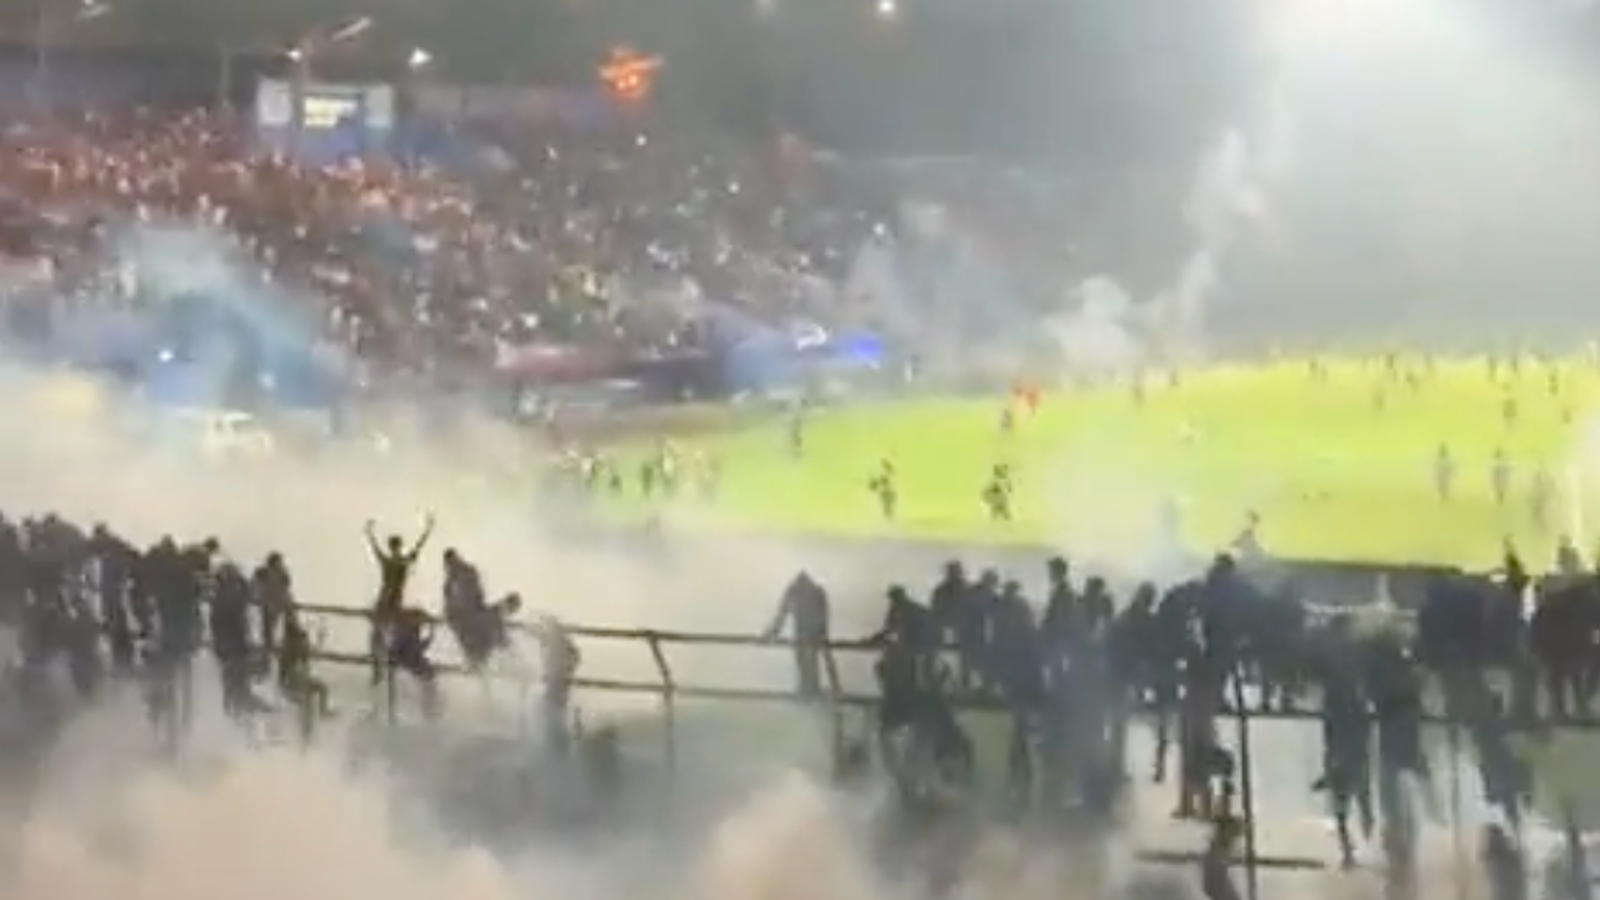 At least 127 killed after riot breaks out at football match